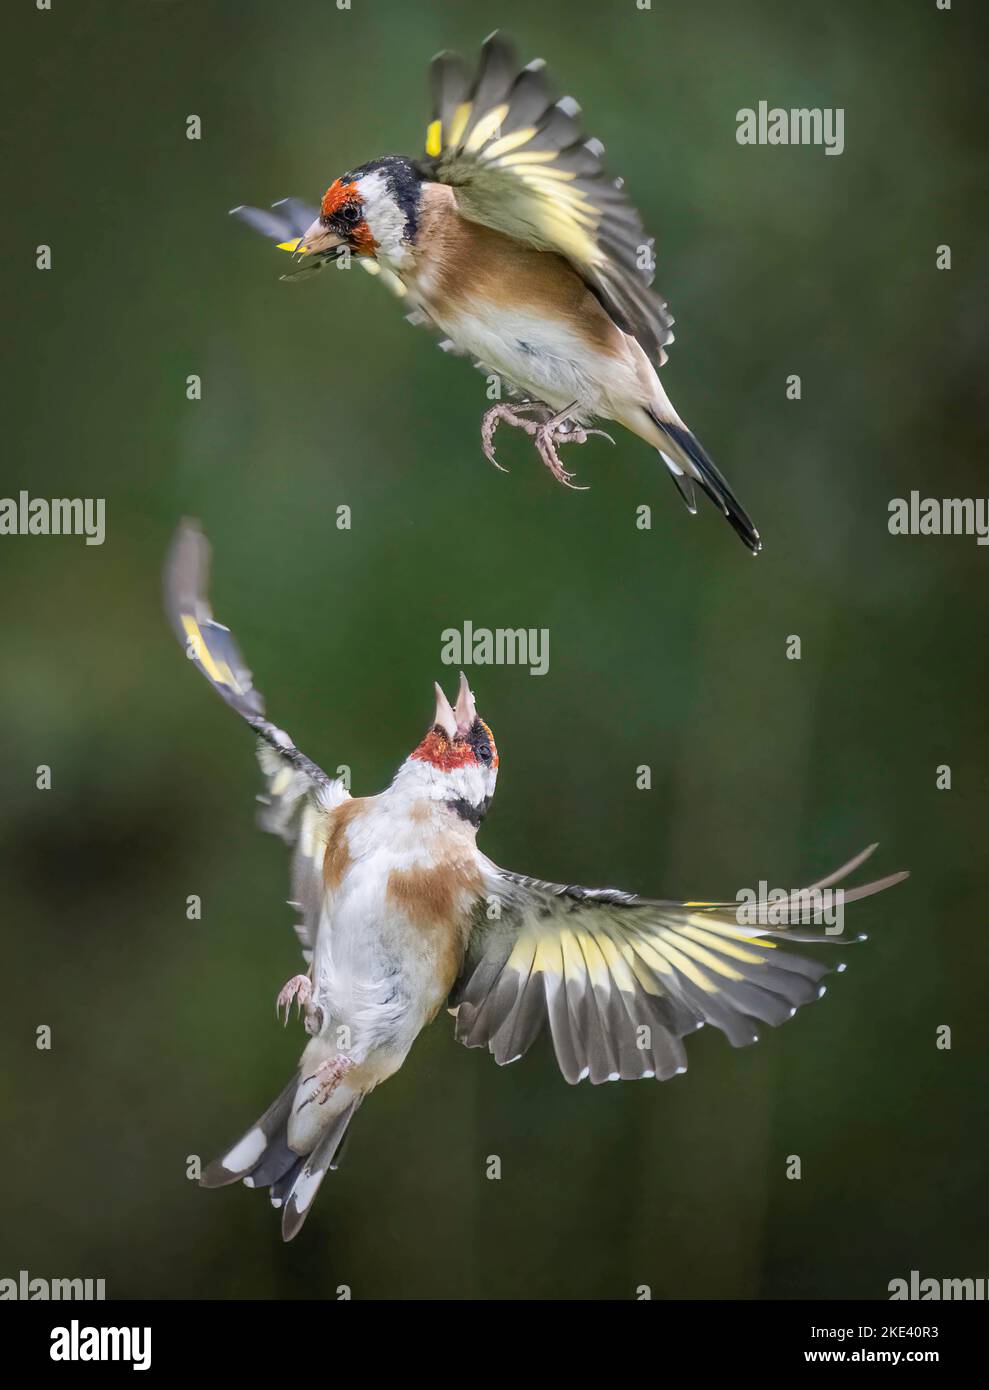 Attack from below. Leeds, UK: THESE TWO goldfinches twist and turn in an intricate battle over food, somersaulting to win the prize. One image shows t Stock Photo